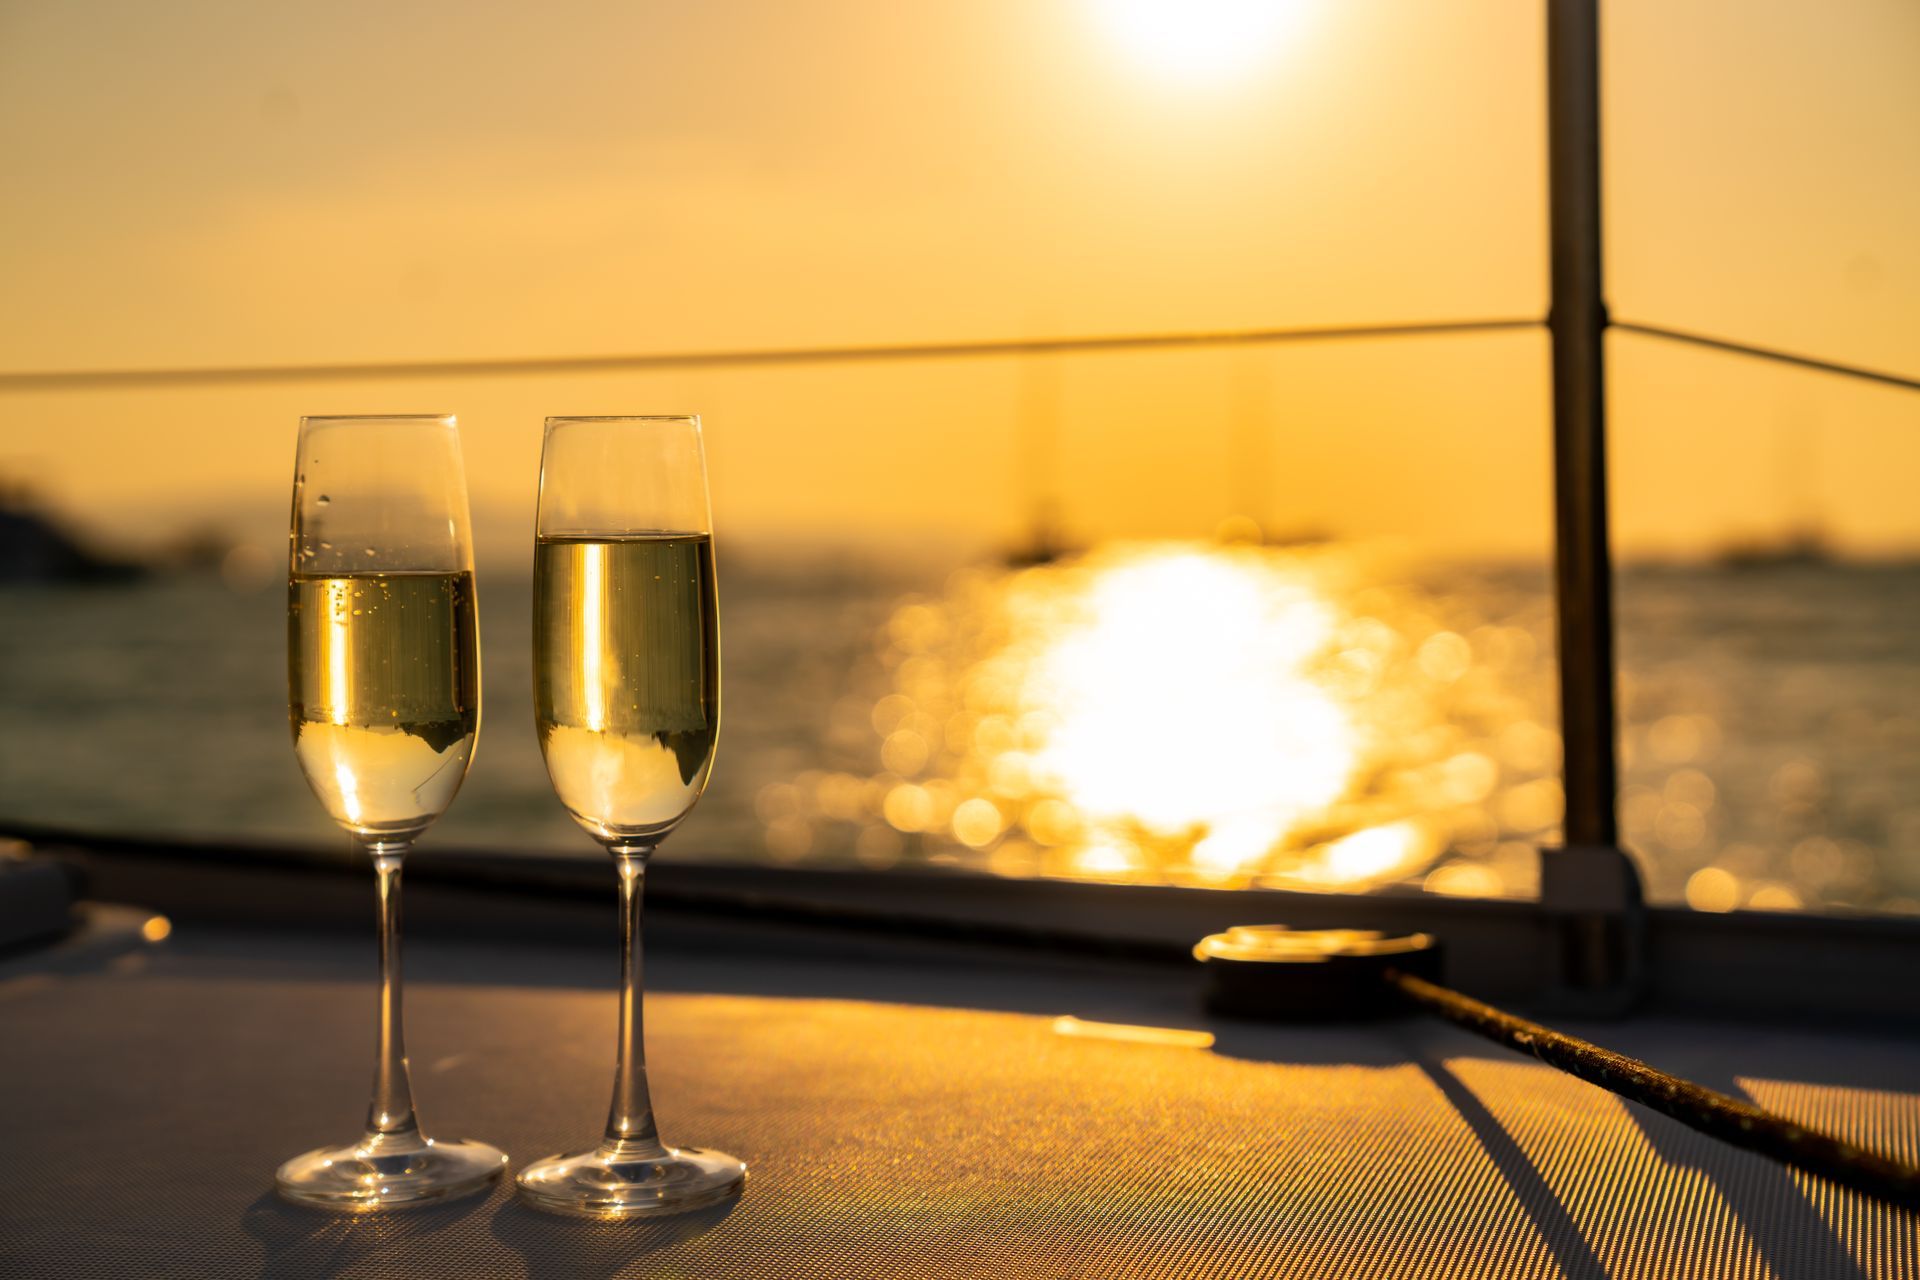 Two glasses of champagne are sitting on a boat at sunset.